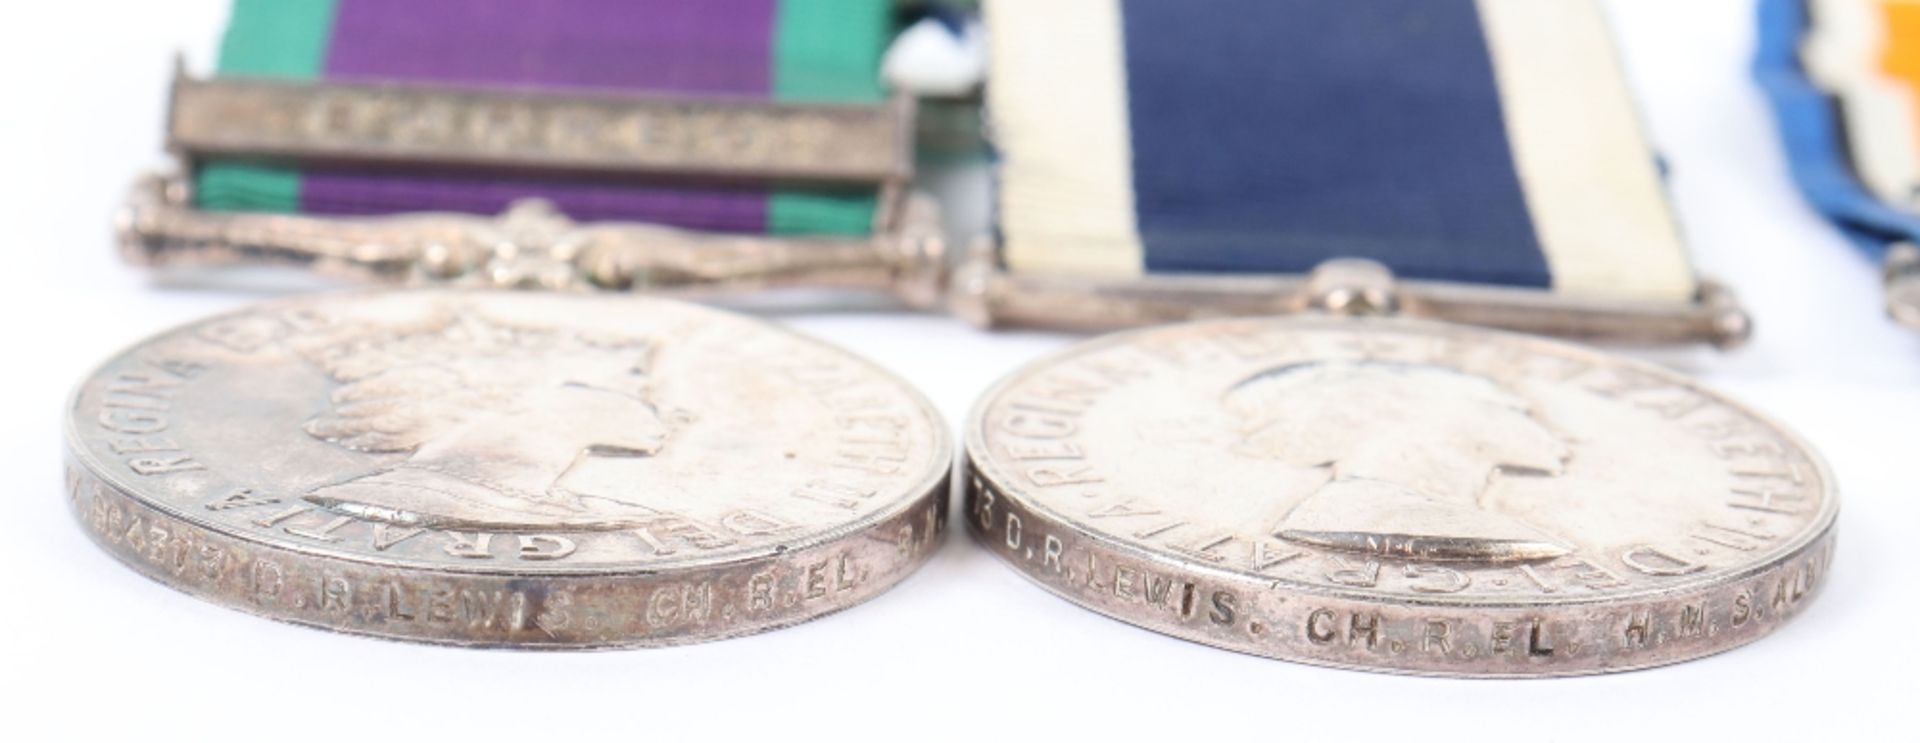 British Medals of the Lewis Family - Image 4 of 6